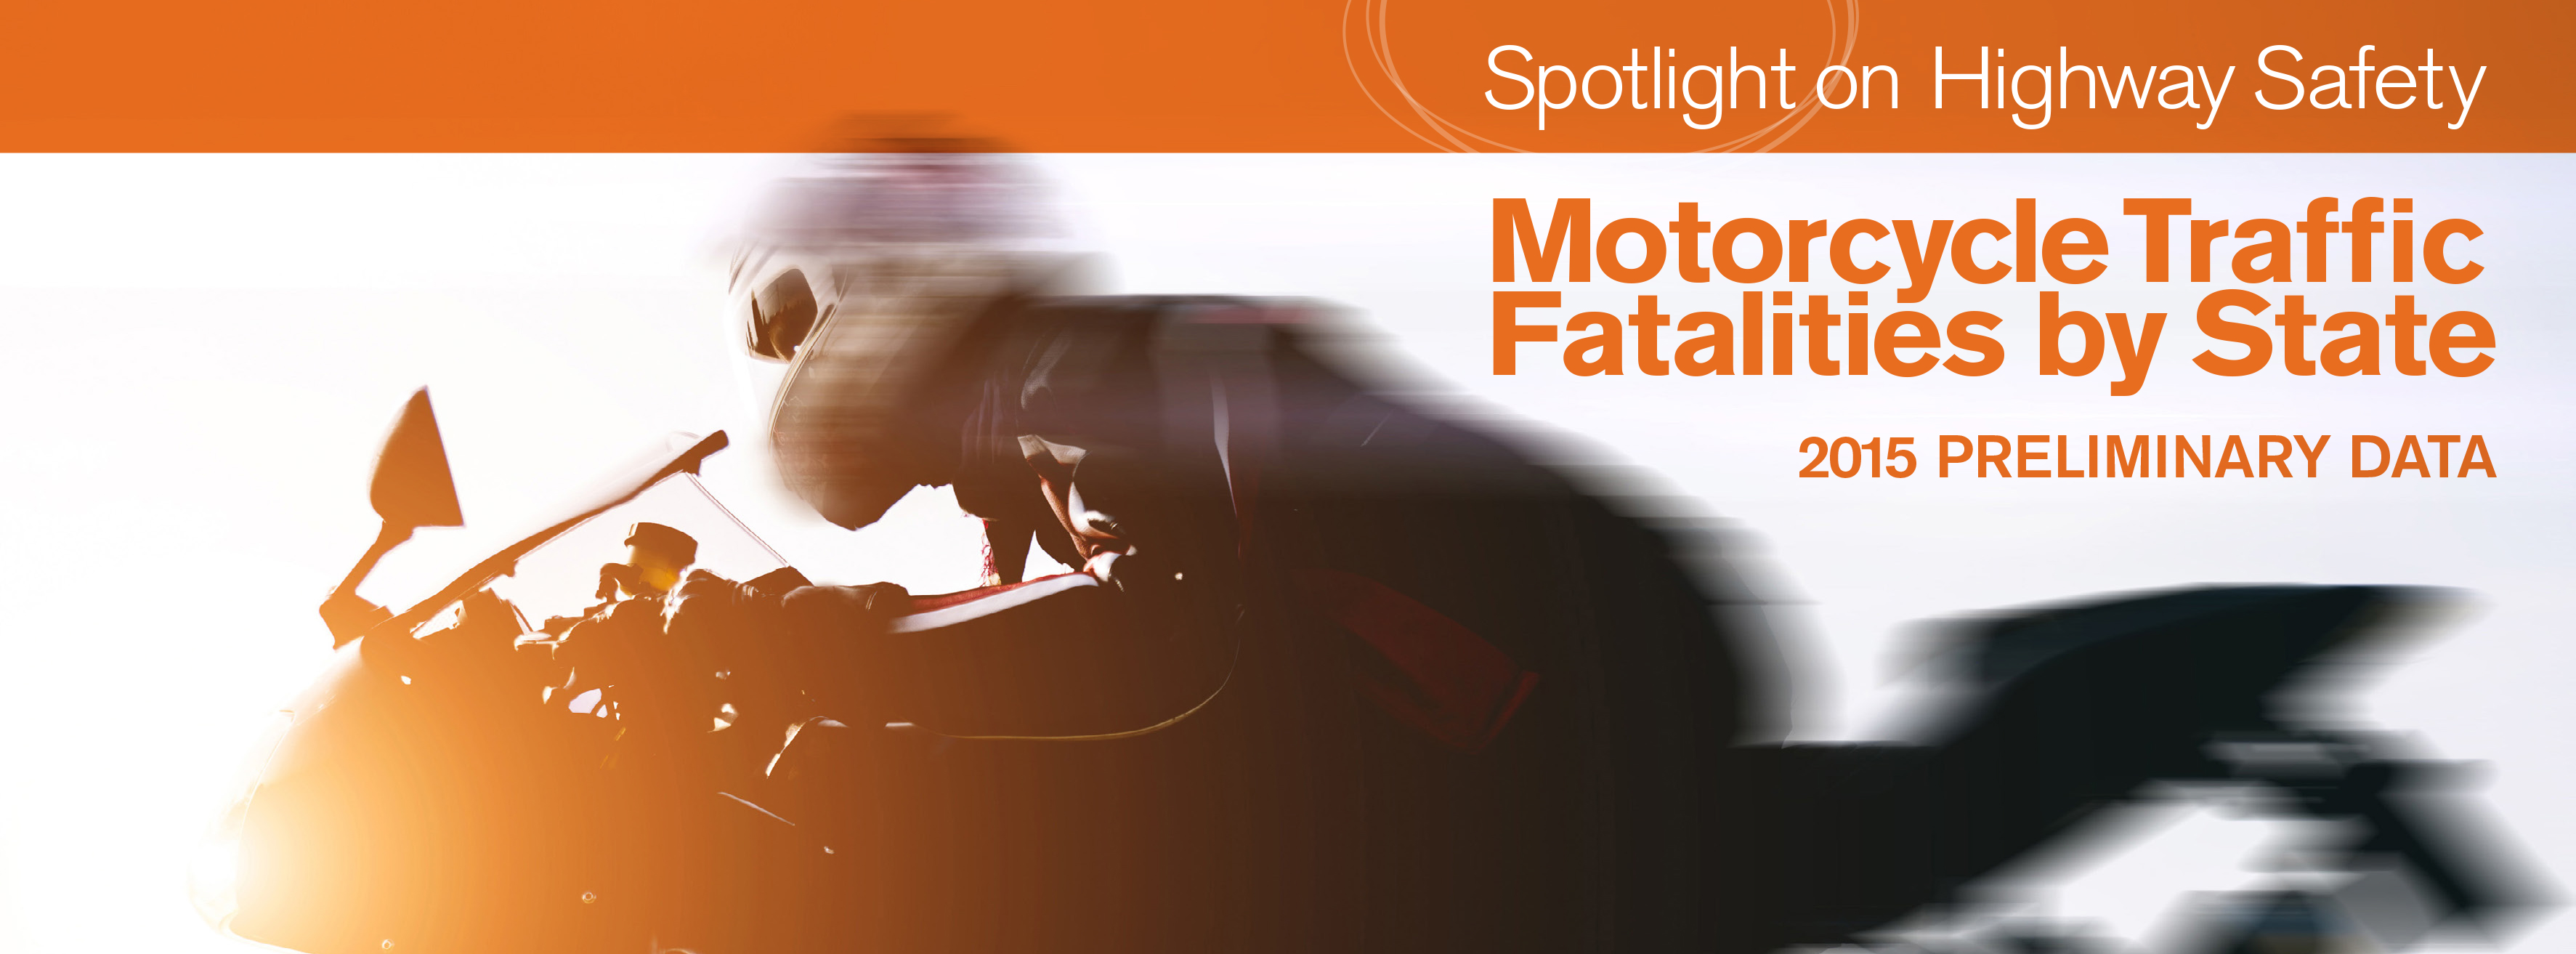 Motorcyclist Traffic Fatalities by State: 2015 Preliminary Data